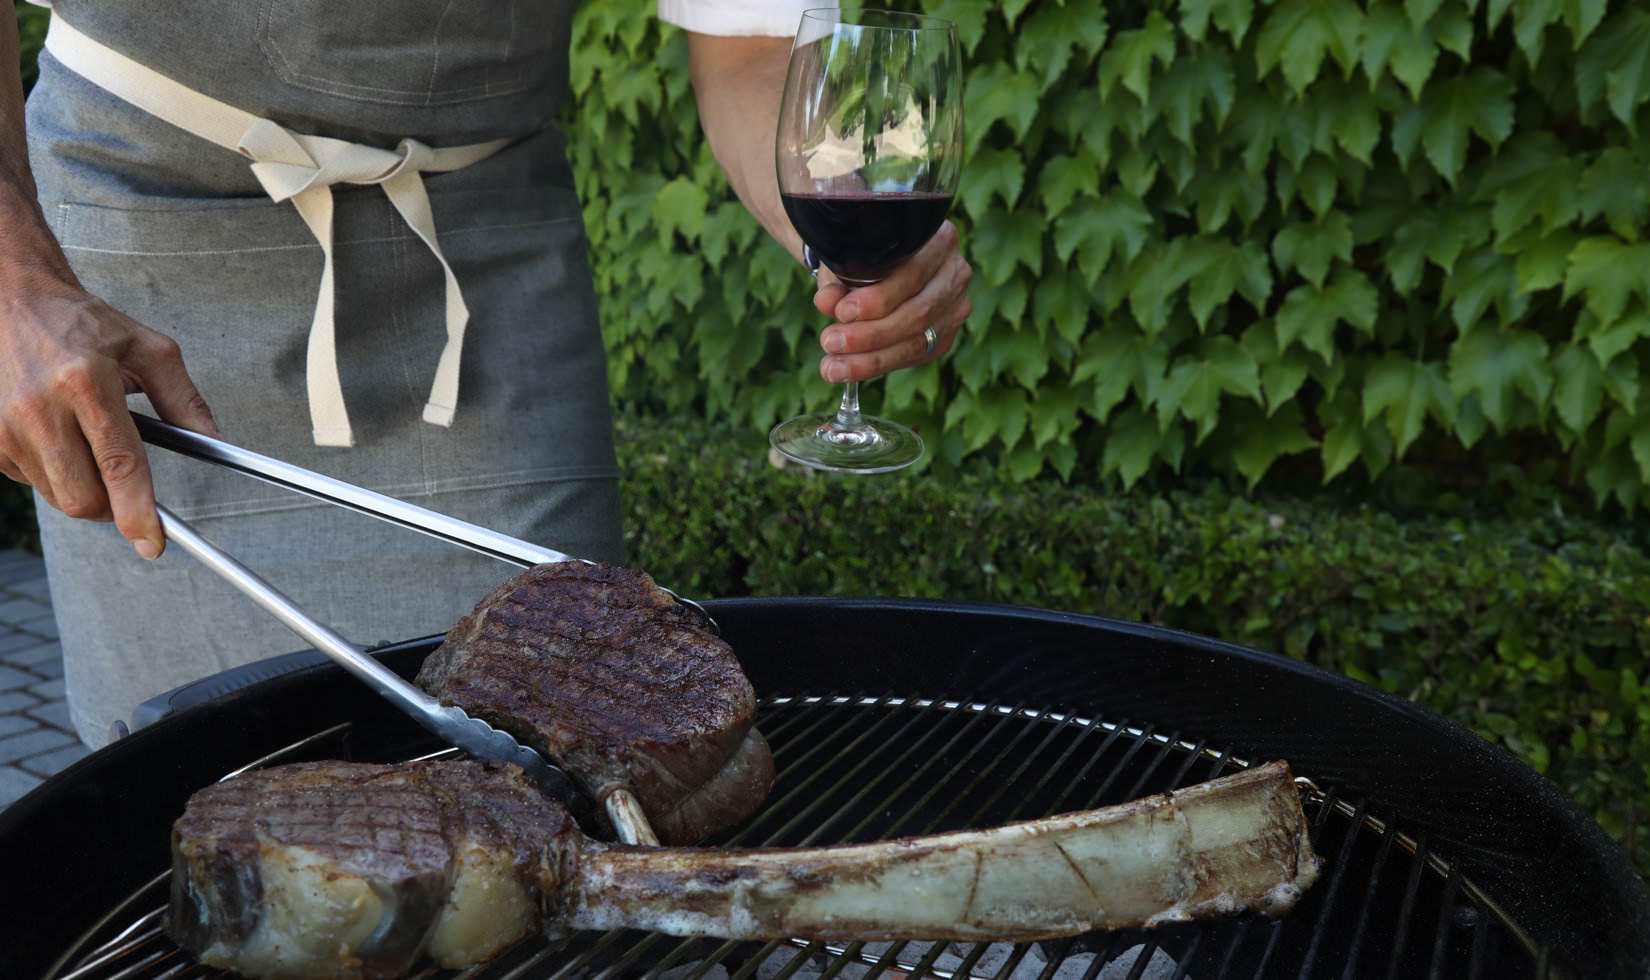 Chargrilling steaks complements the subtle nuances in cabernet that come from its toasted oak barrels.